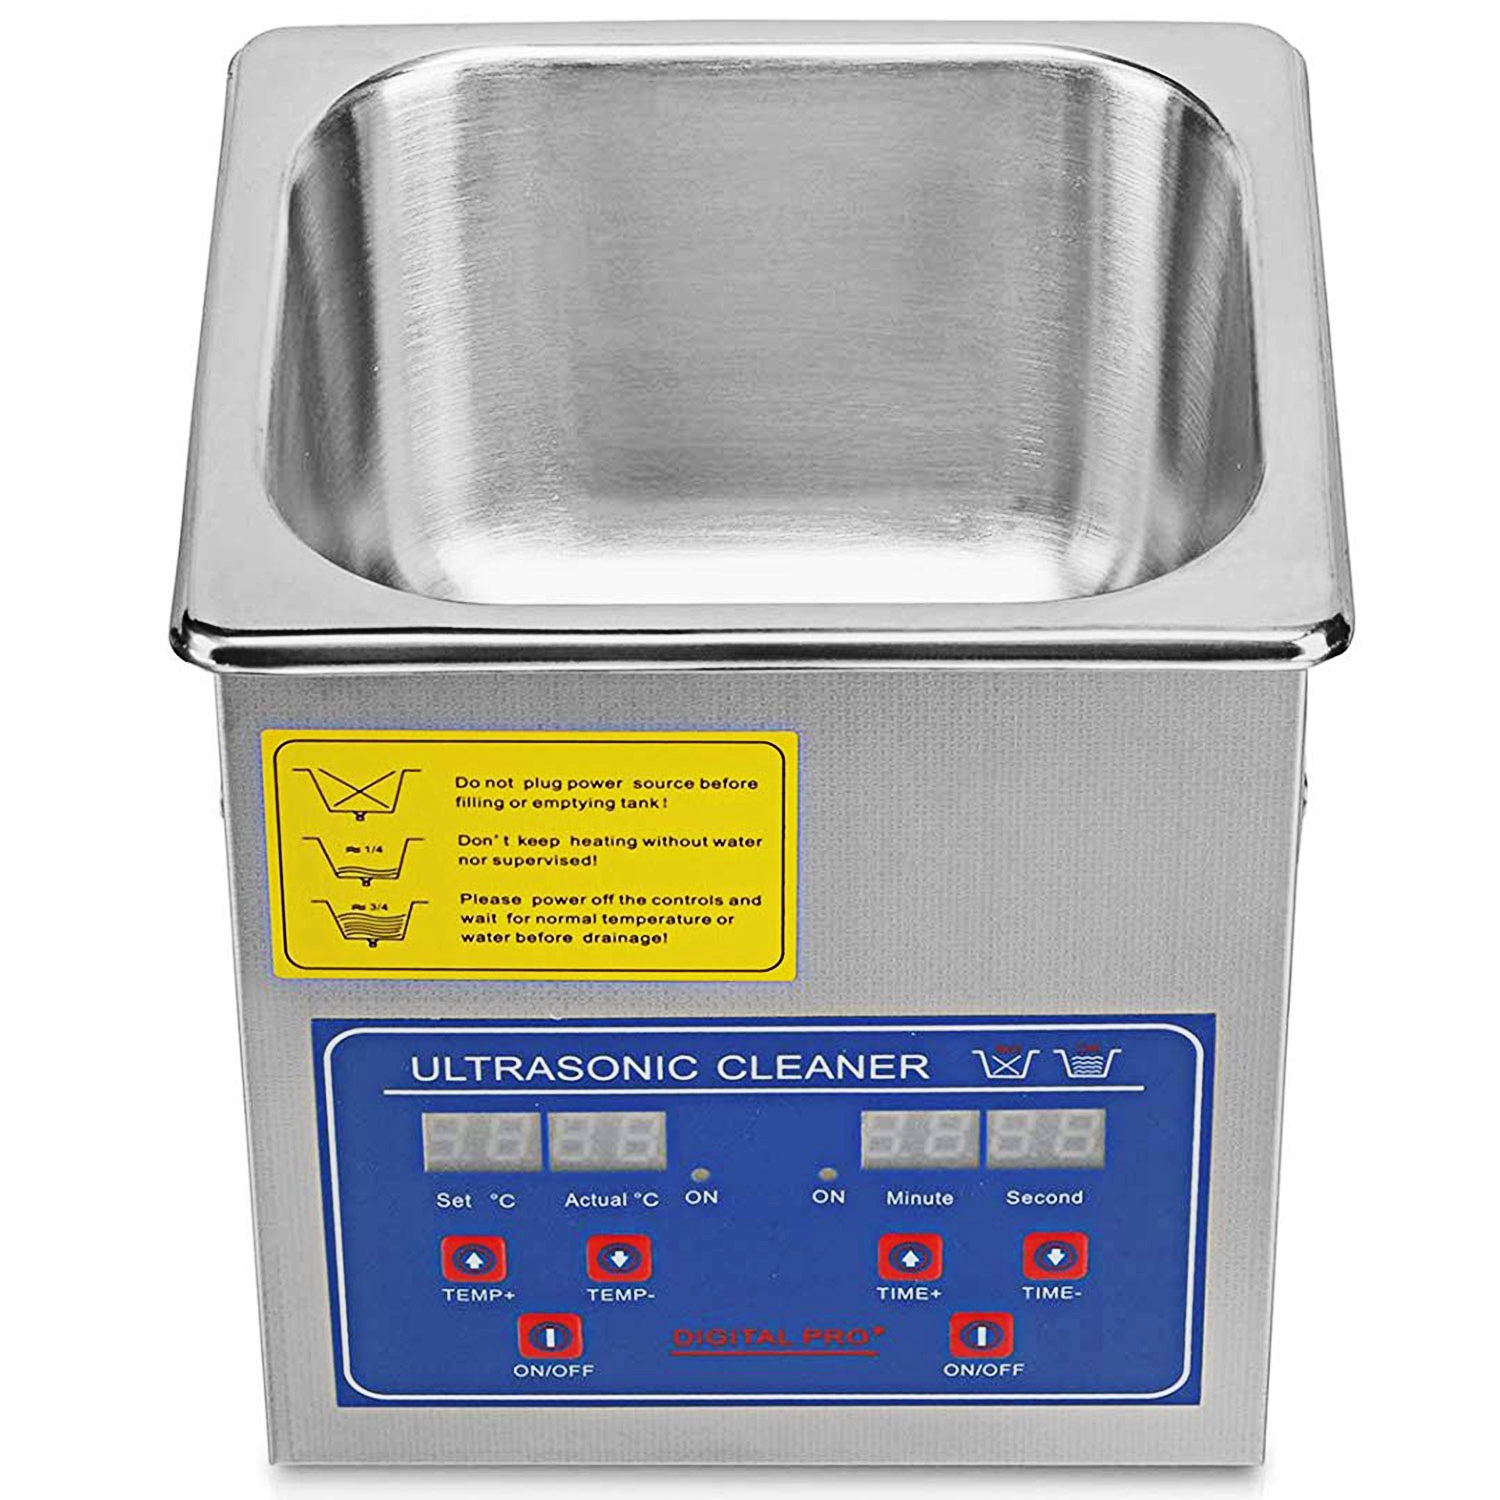 ultrasonic cleaner, 2.8-3L, jewelry cleaner